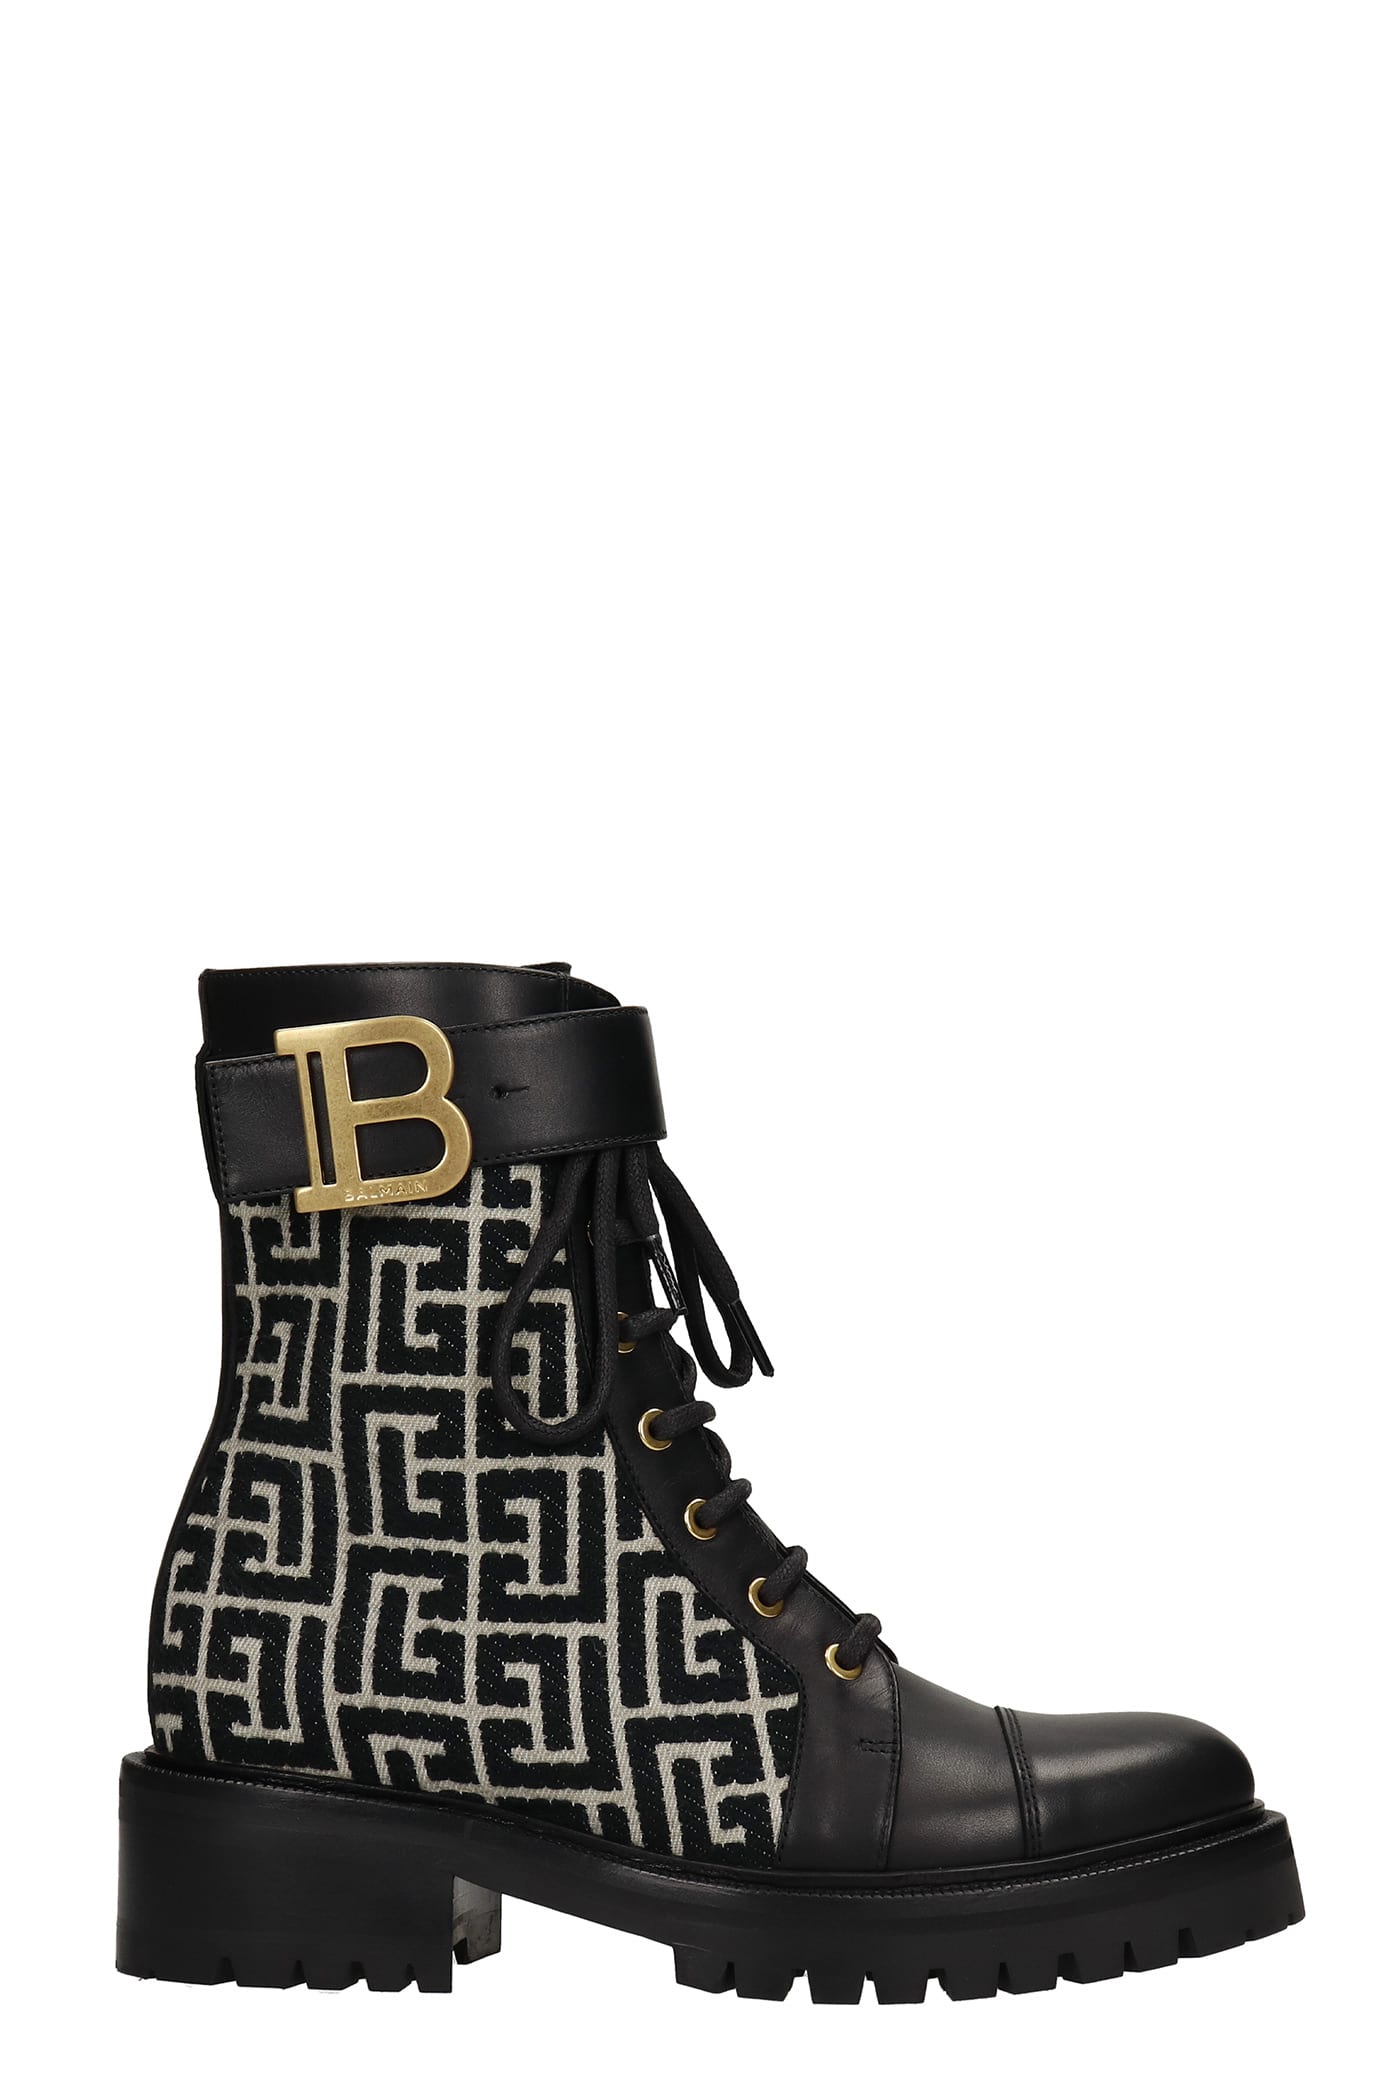 Balmain Ranger Boots Combat Boots In Black Leather